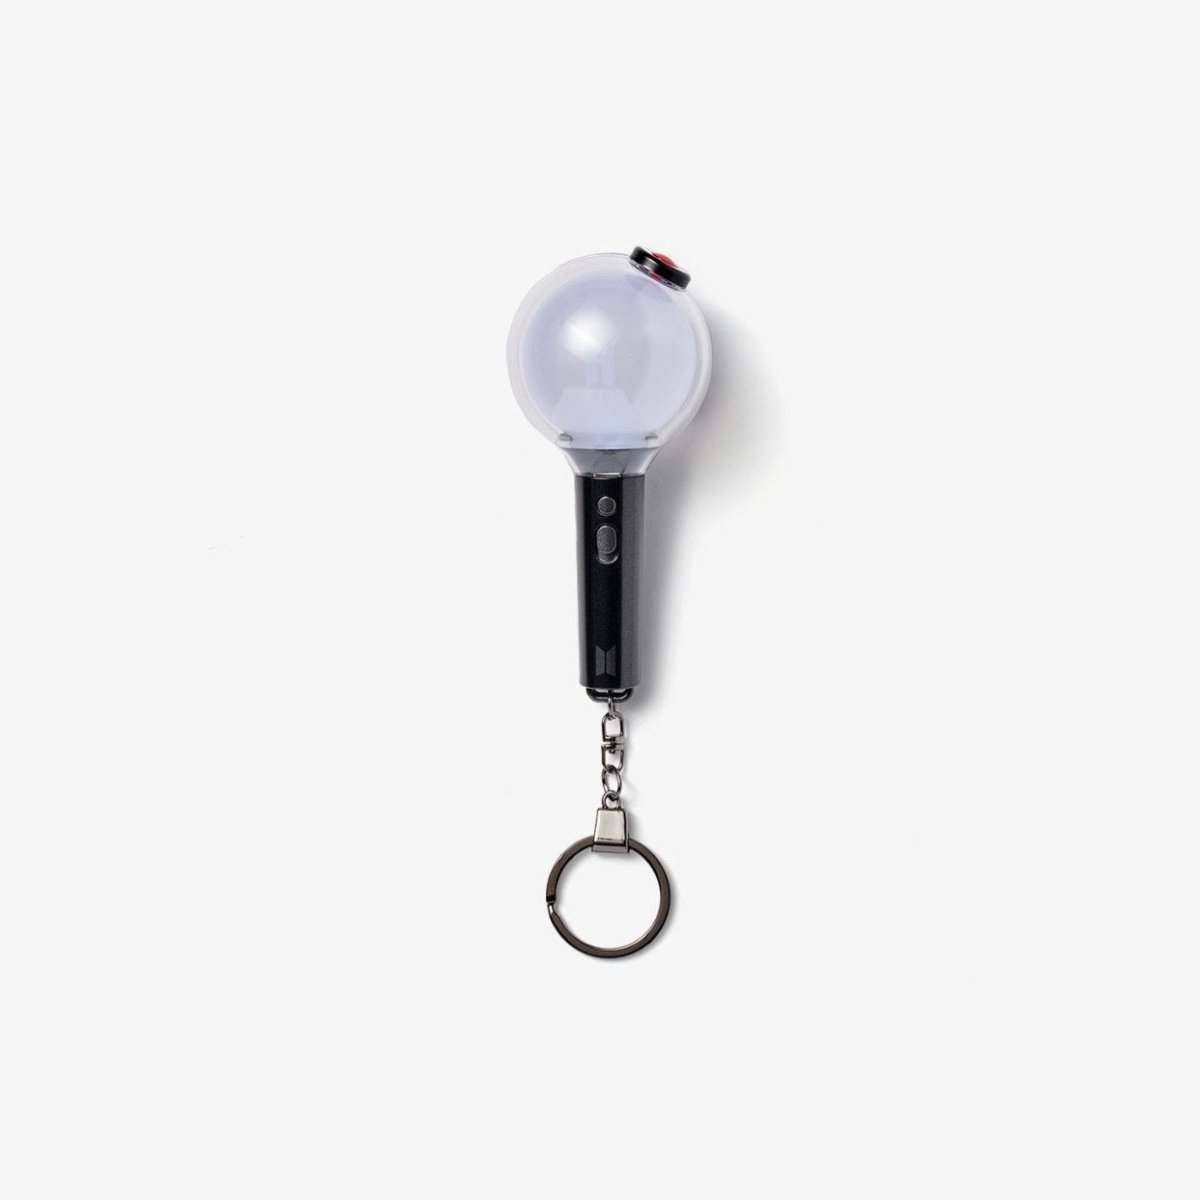 BTS ARMY BOMB OFFICIAL LIGHT STICK SPECIAL EDITION